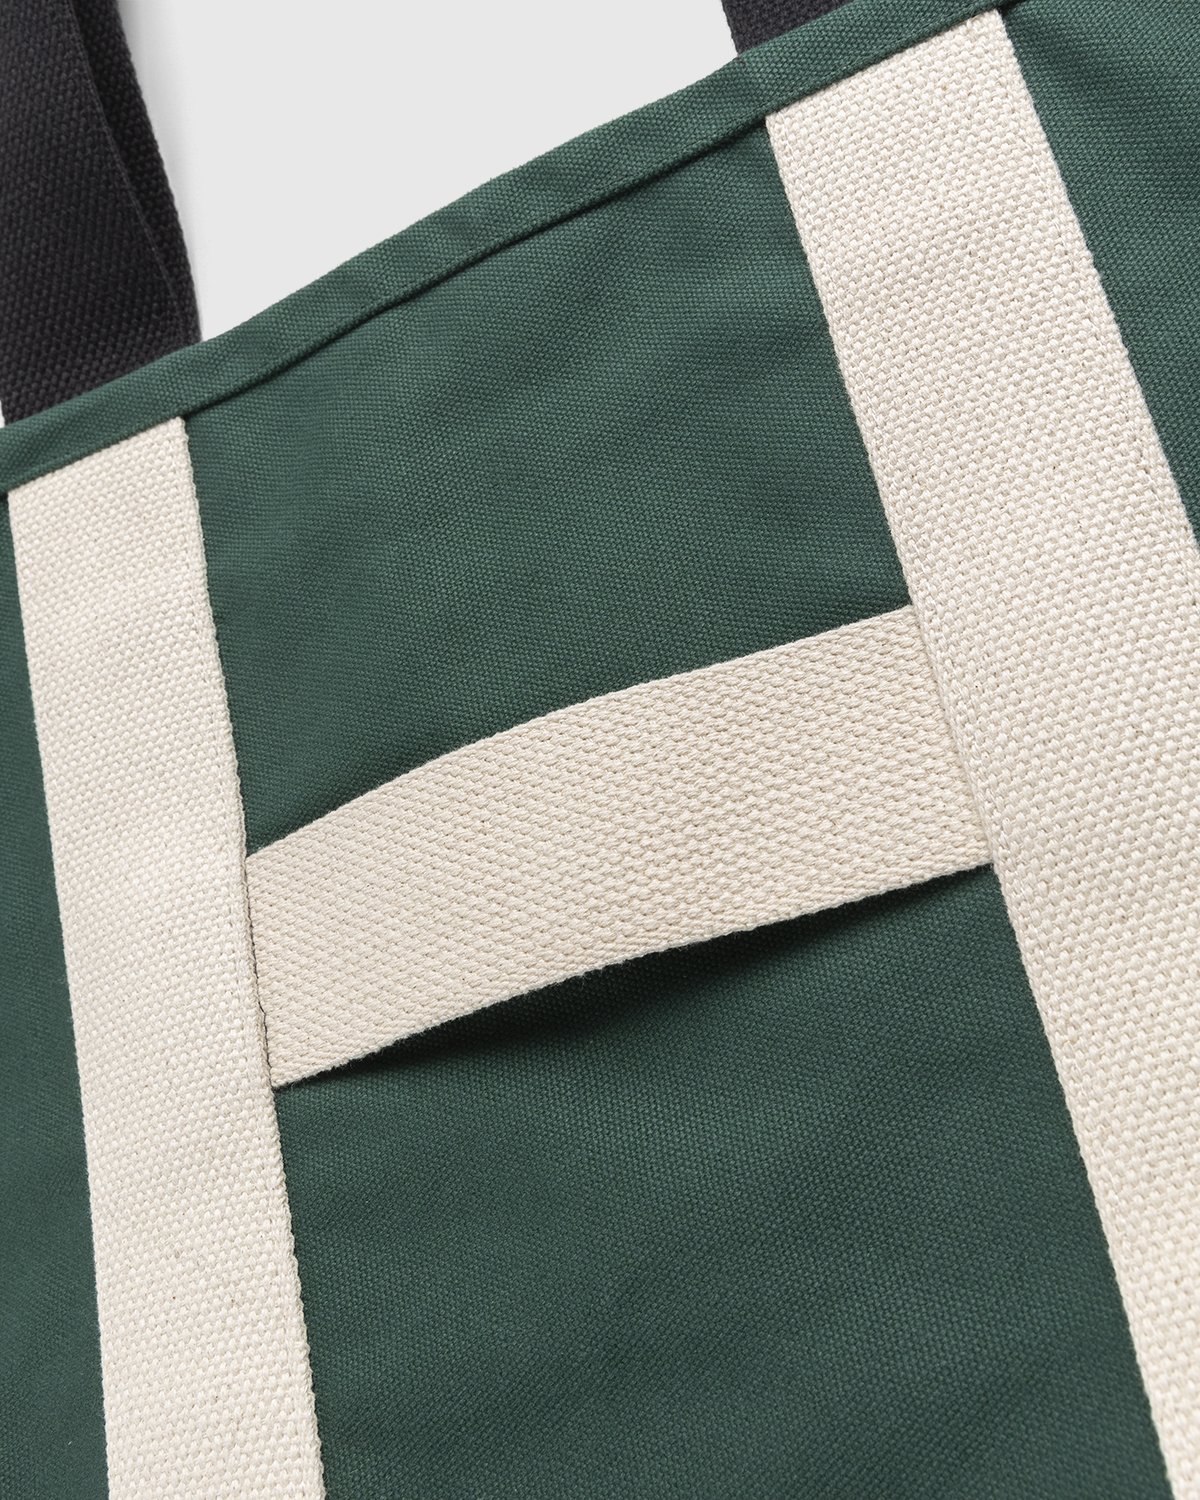 Highsnobiety - Large Staples Tote Bag Green - Accessories - Green - Image 4